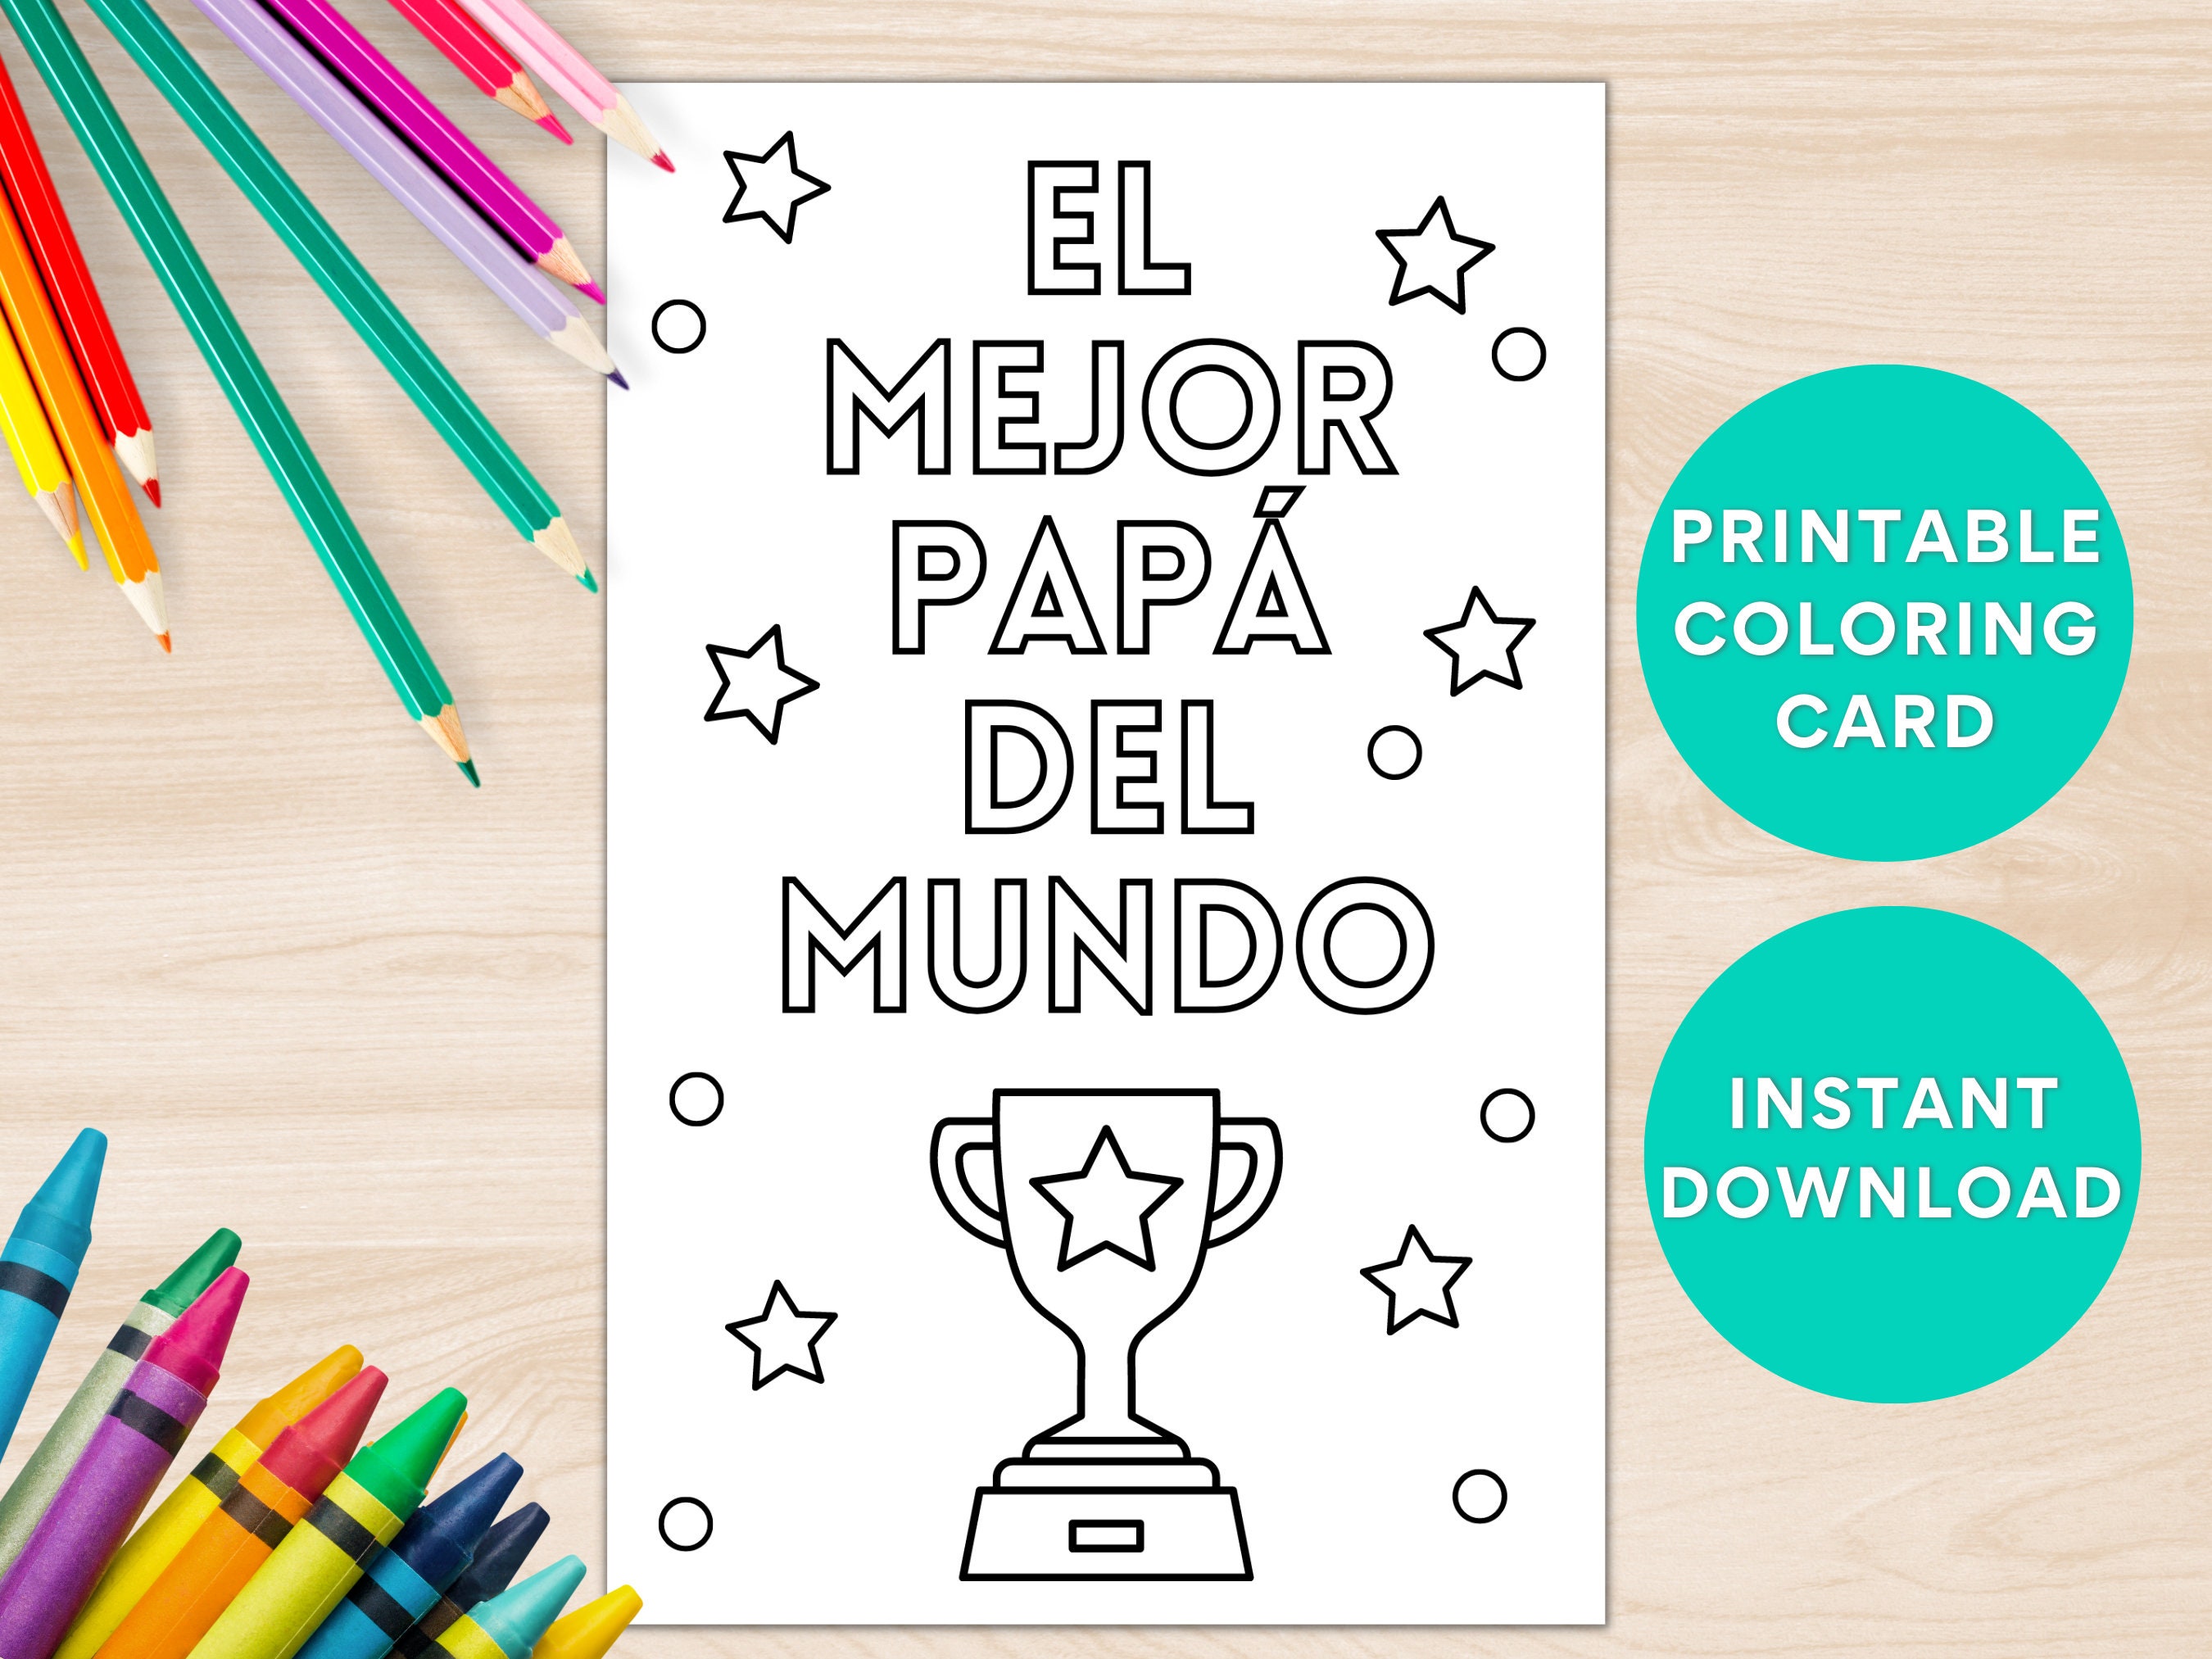 Spanish fathers birthday day printable card dad birthday card for kids coloring card page colorable card instant download download now